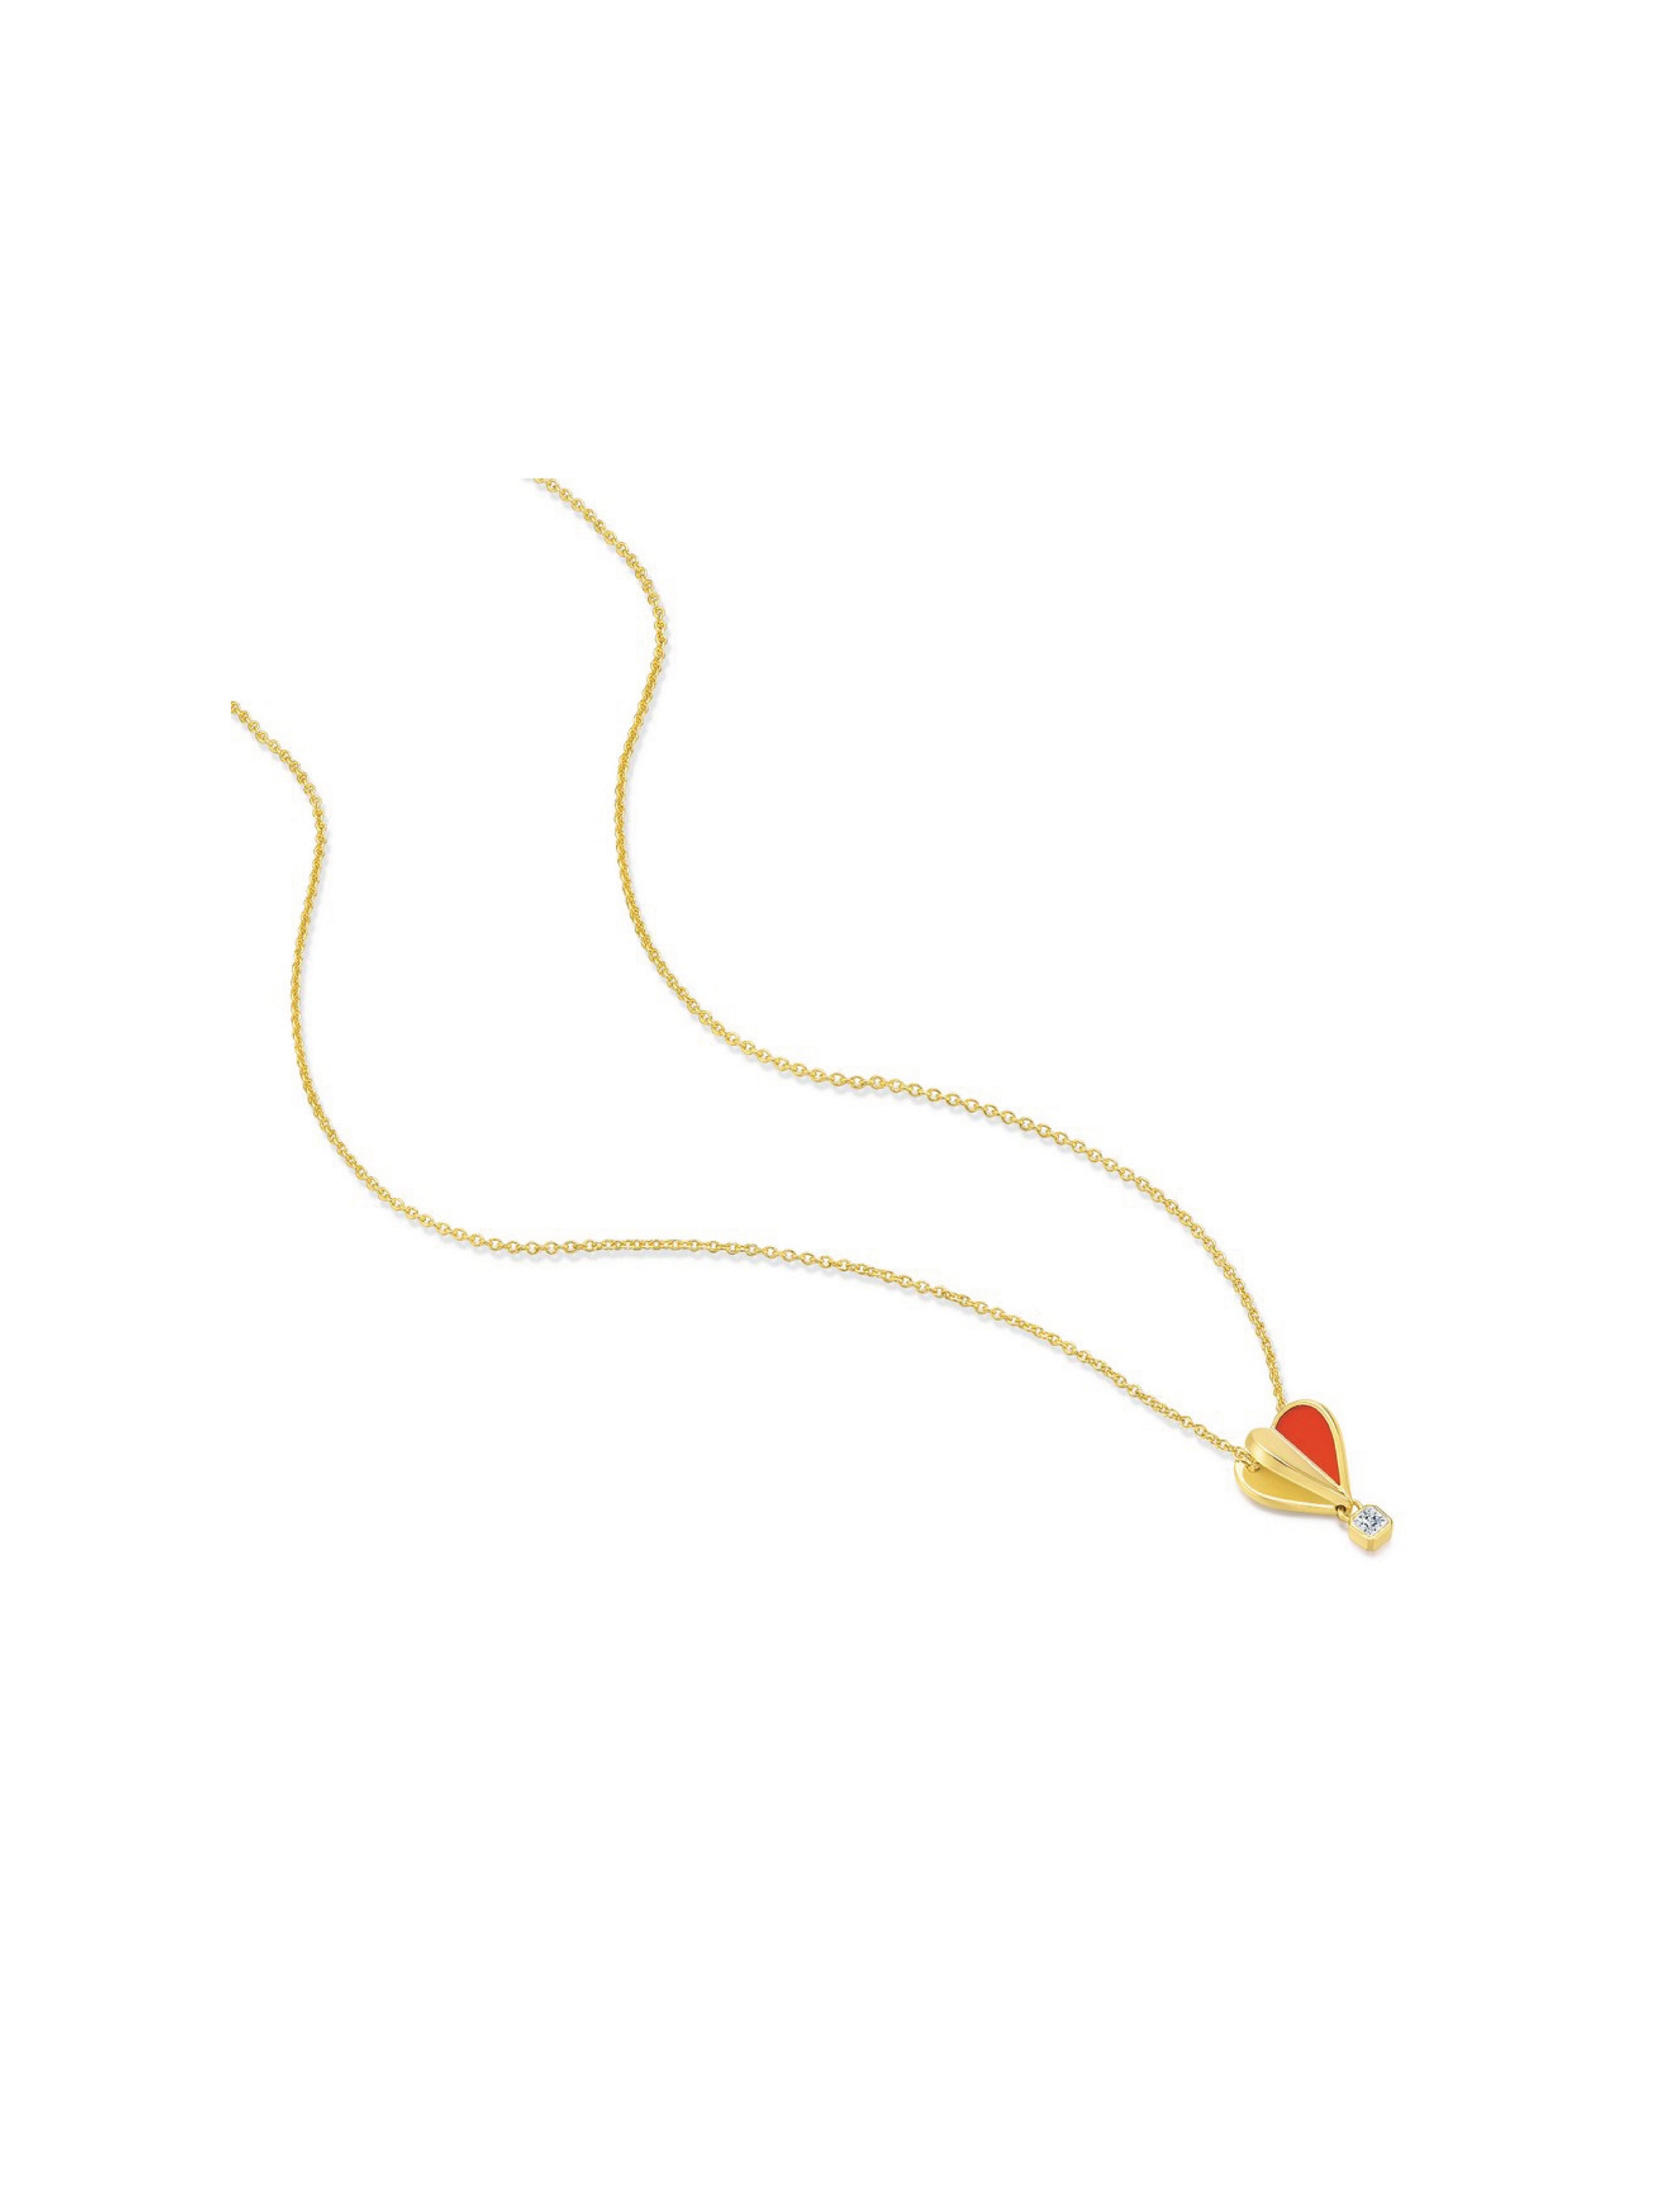 Floating Love Necklace - Red Agate - Orange Cube